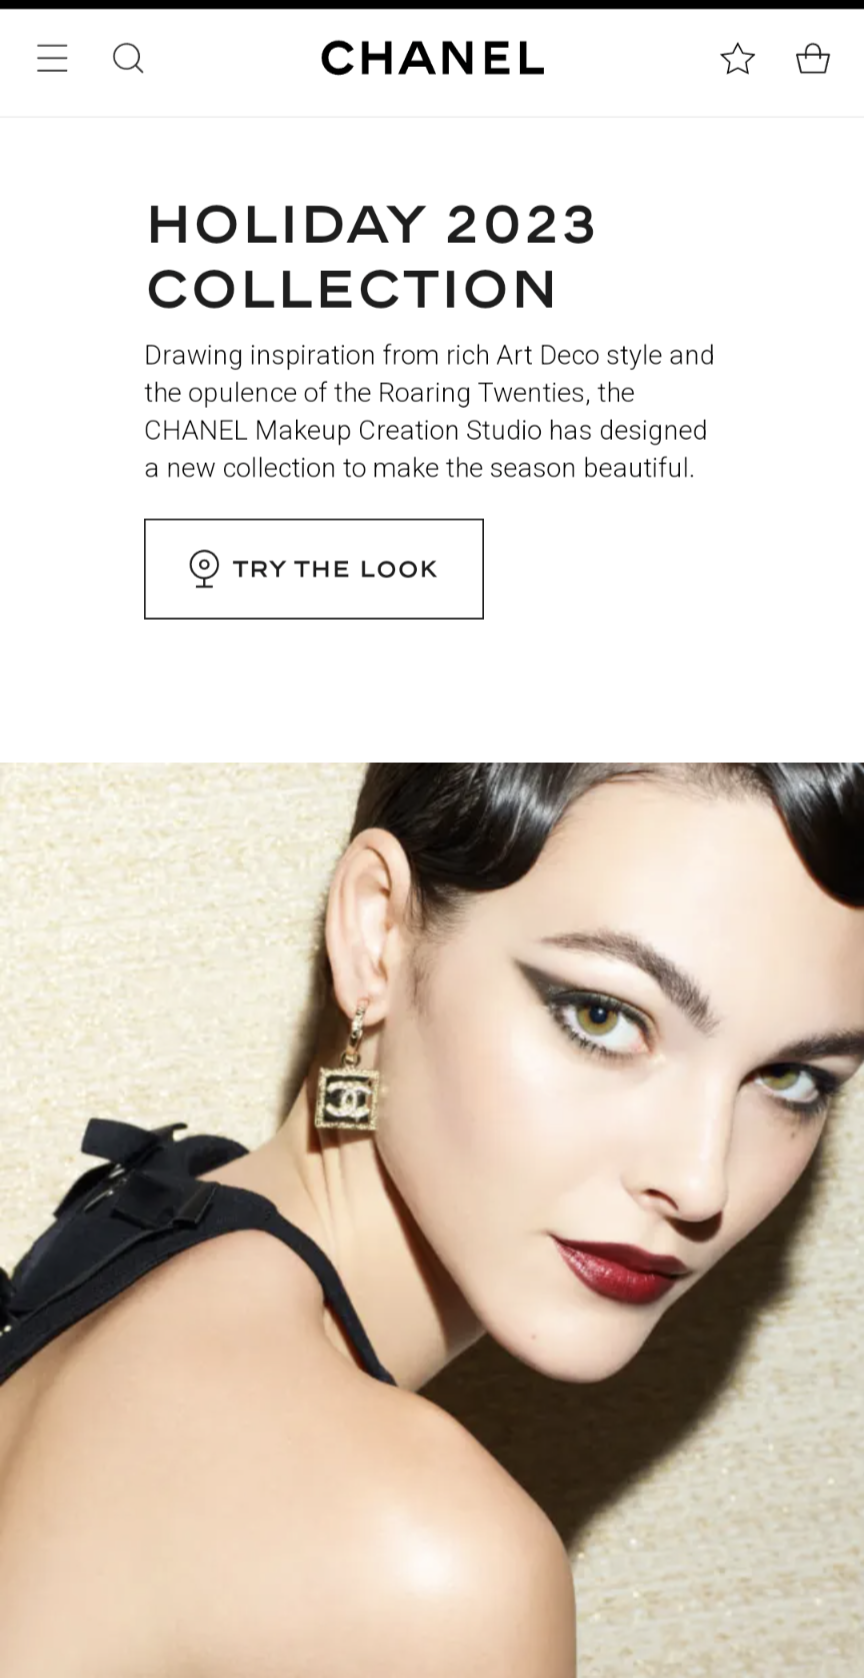 CHANEL Beauty Gives Us An Exquisite Équinoxe Makeup Collection For